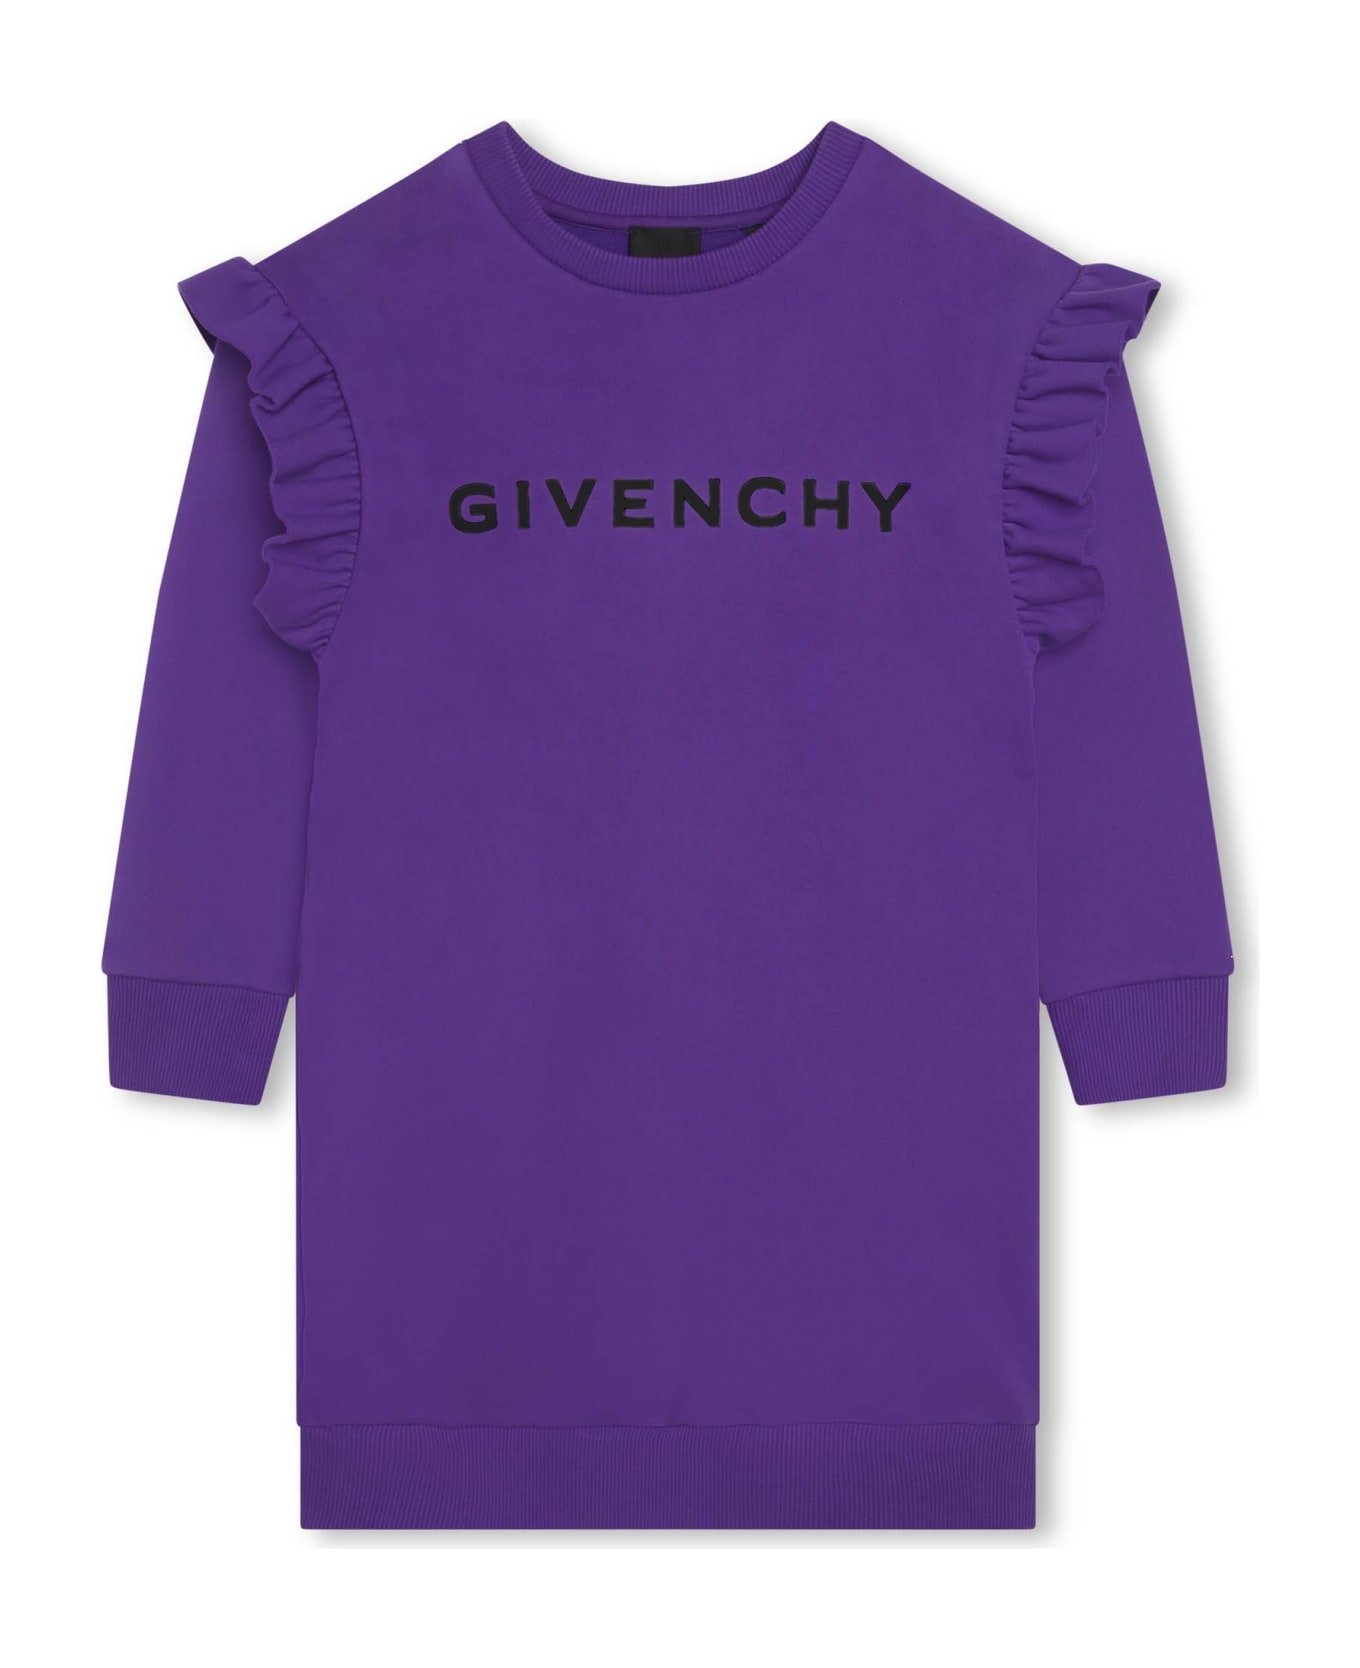 Givenchy Dresses With Print - Viola